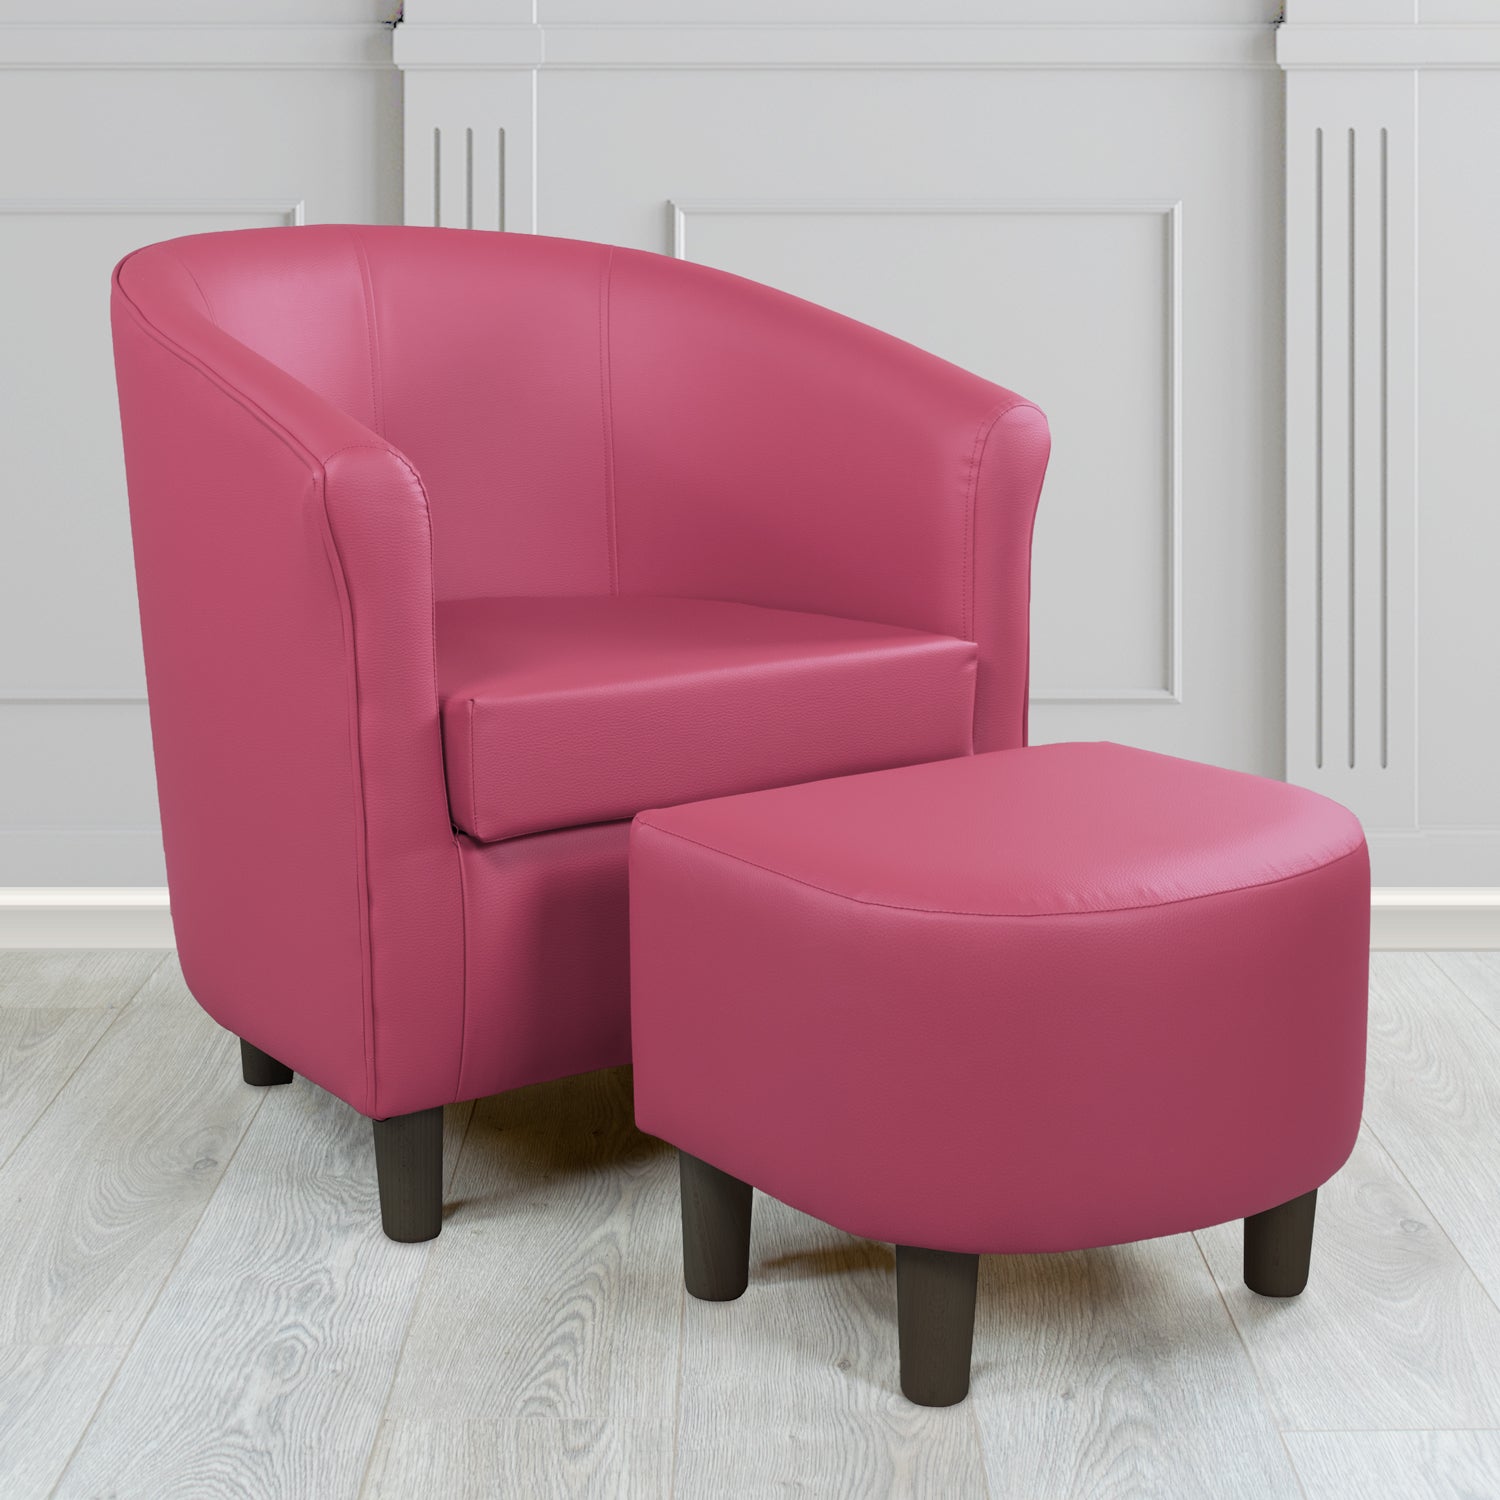 Tuscany Just Colour Deep Rose Faux Leather Tub Chair with Dee Footstool Set - The Tub Chair Shop